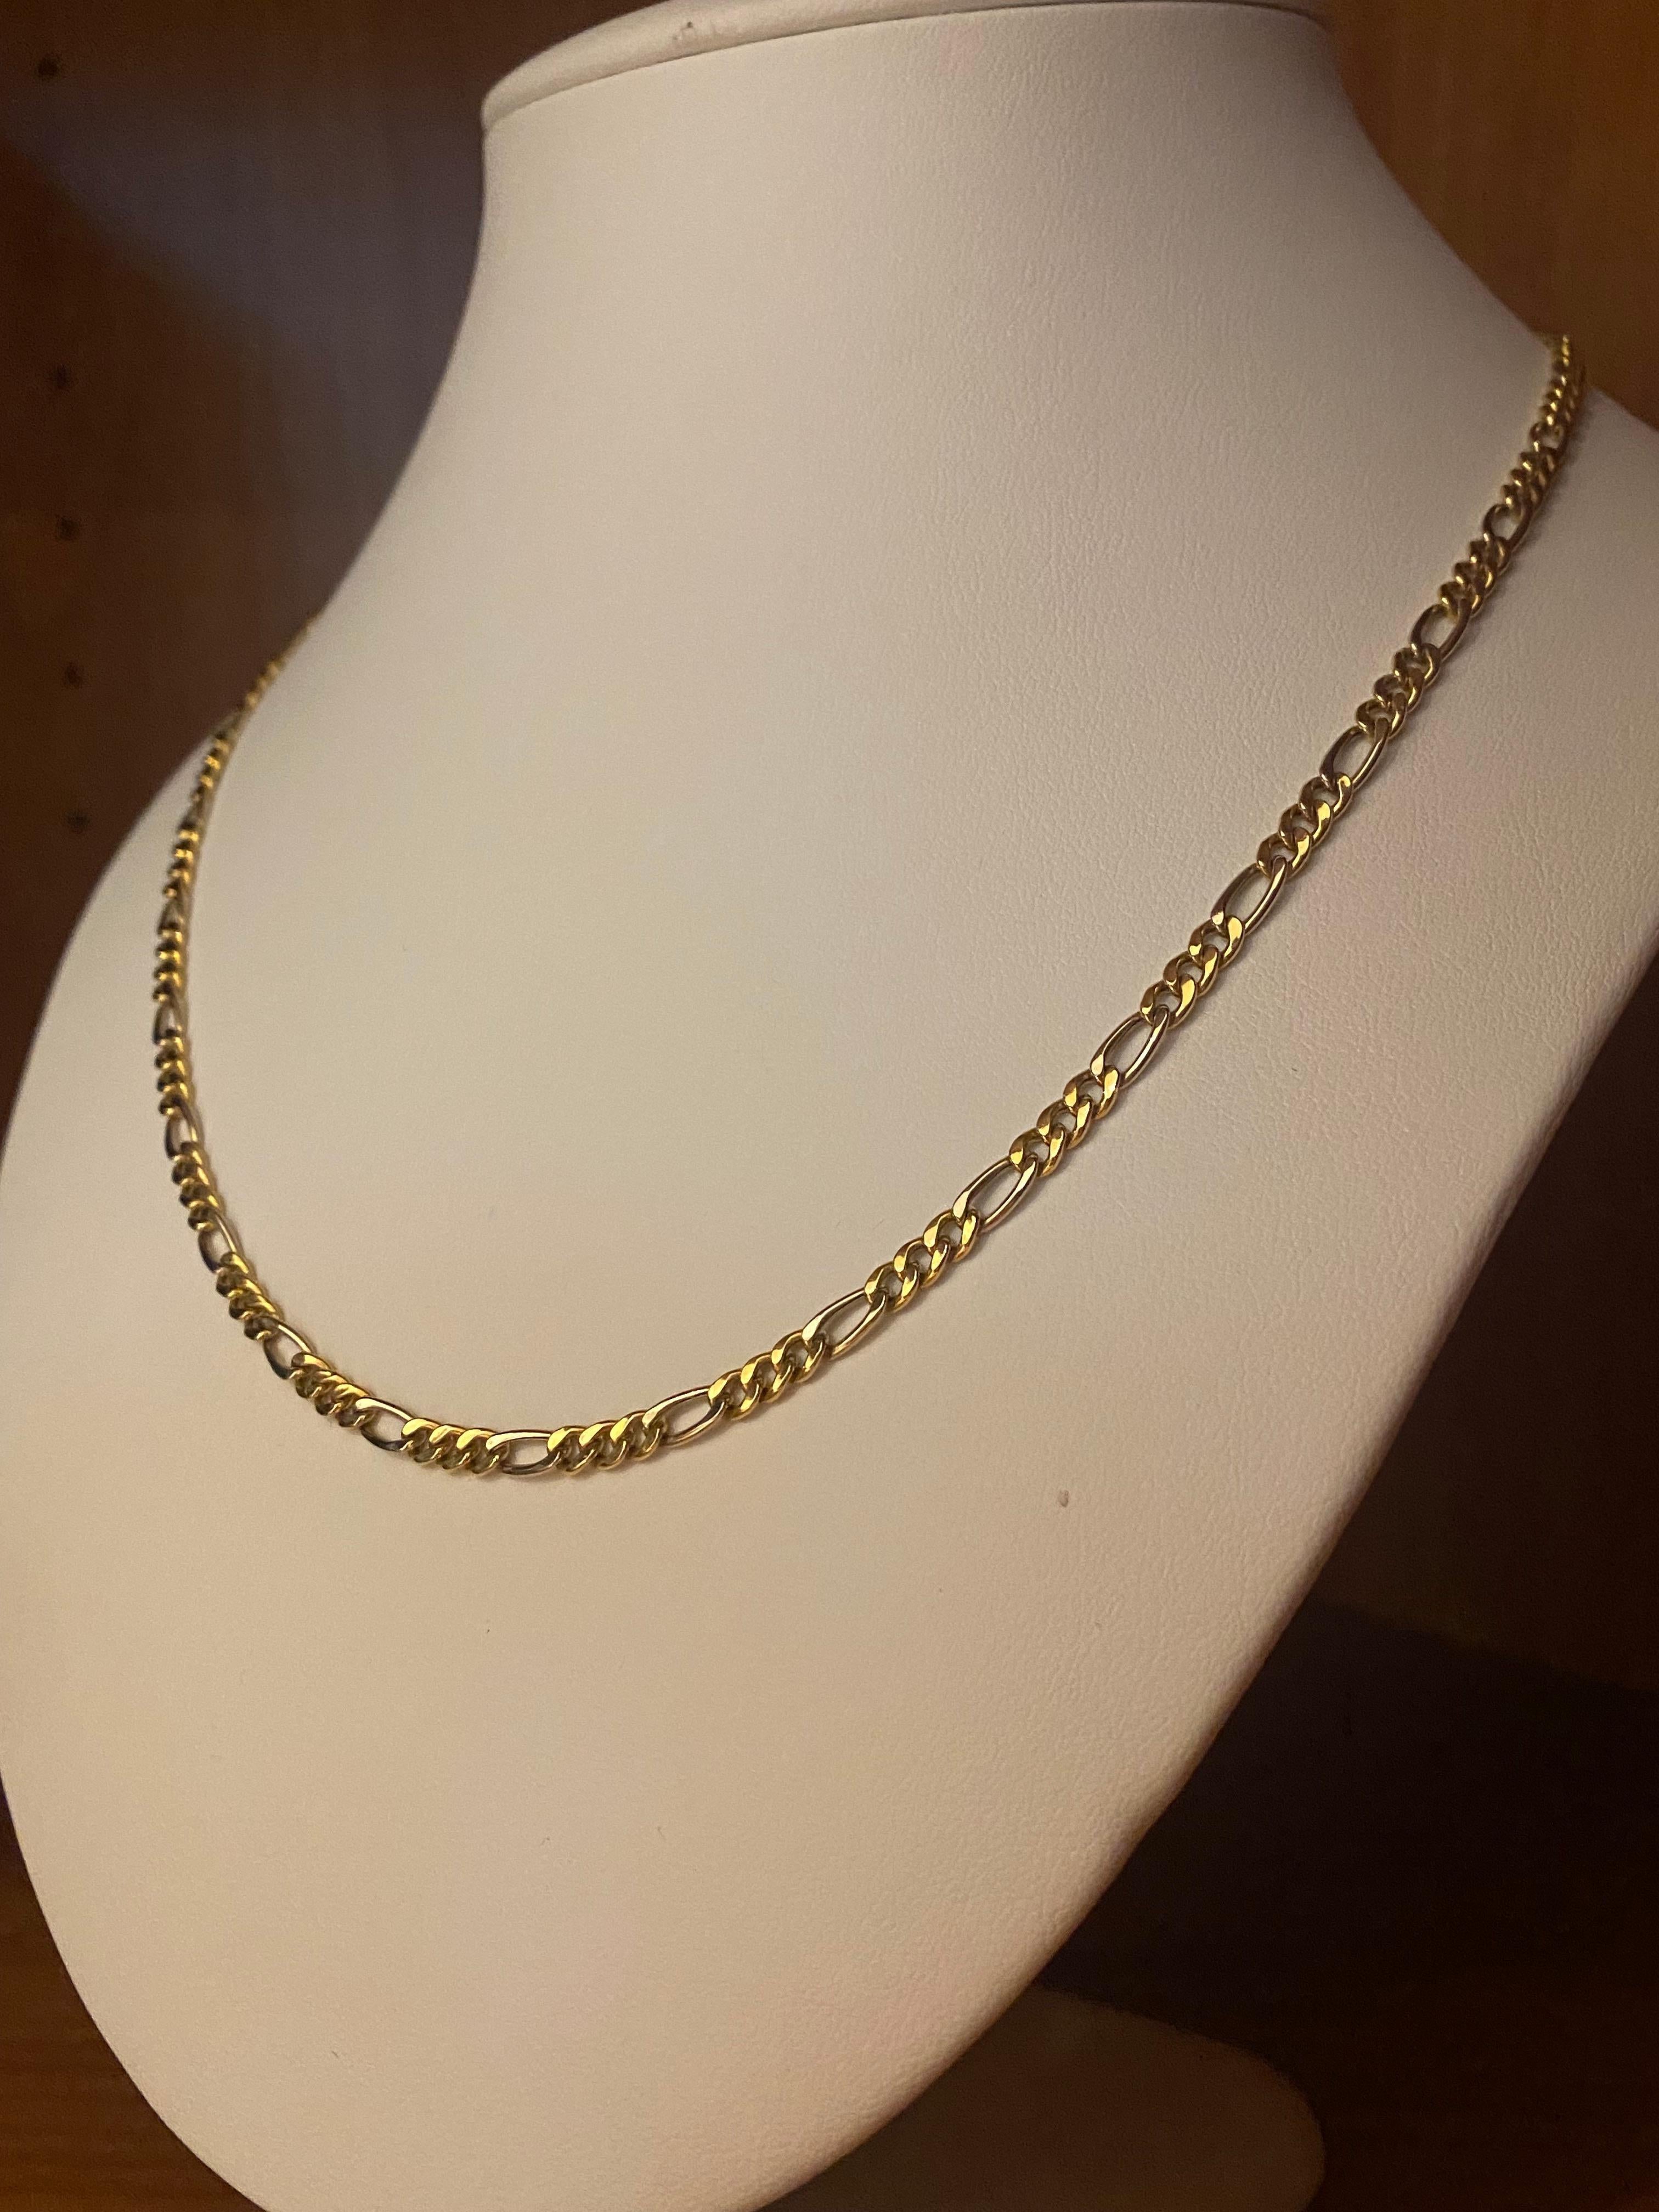 Retro Two-Tone 18K 750 White & Yellow Gold Figaro Links Vintage Chain, 50.5cm, Italy. For Sale